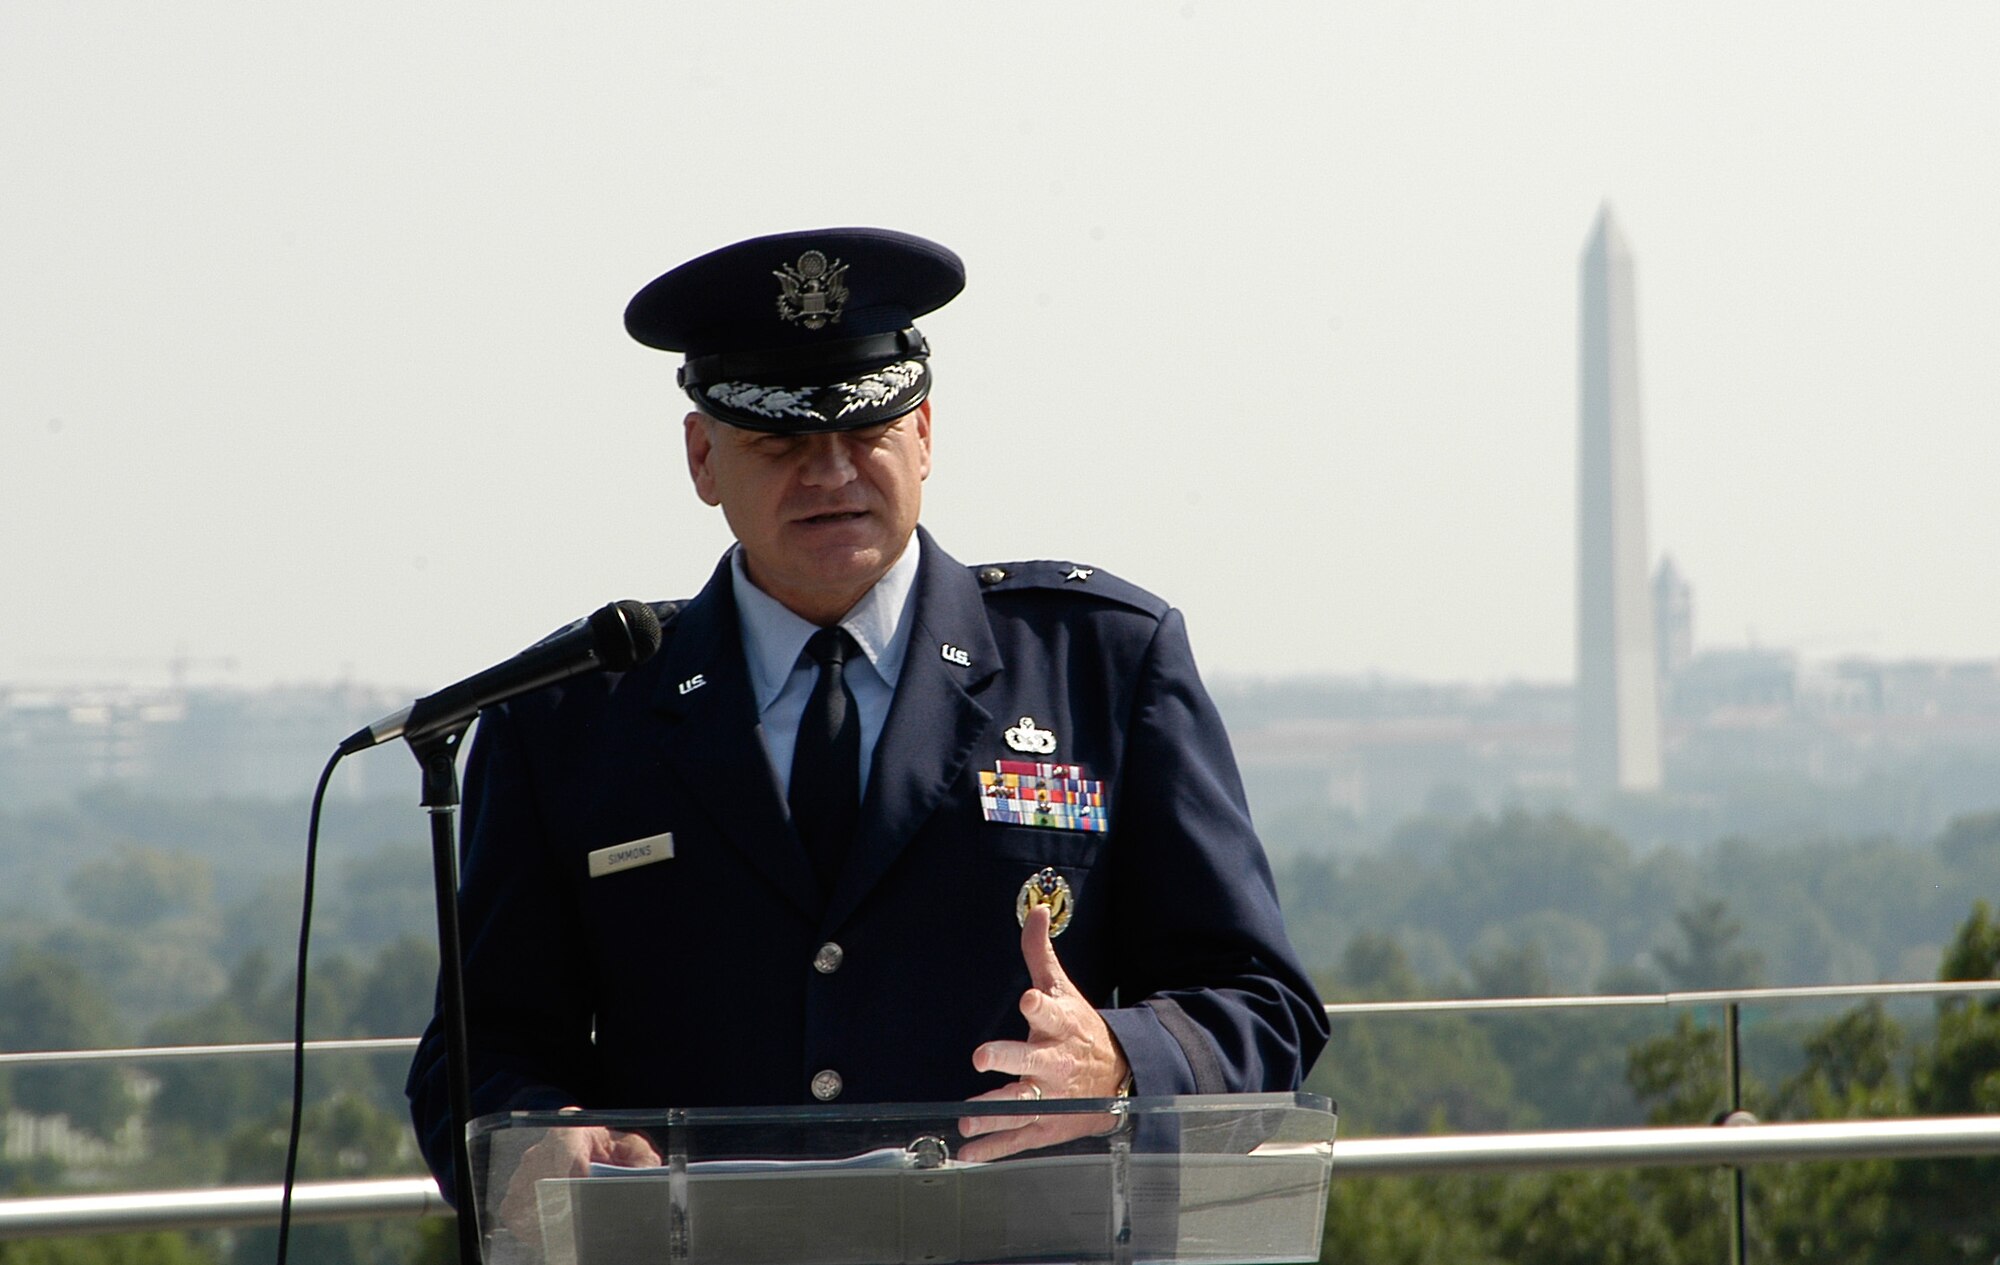 Brigadier General Dana Simmons, Air Force Office of Special Investigations Commander, delivers a speech celebrating 60 years of proud service from the men and women of AFOSI Aug.1 at the Air Force Memorial. Behind him in the distance is the Washington Momument. (U.S. Air Force photo/Tech. Sgt. John Jung)